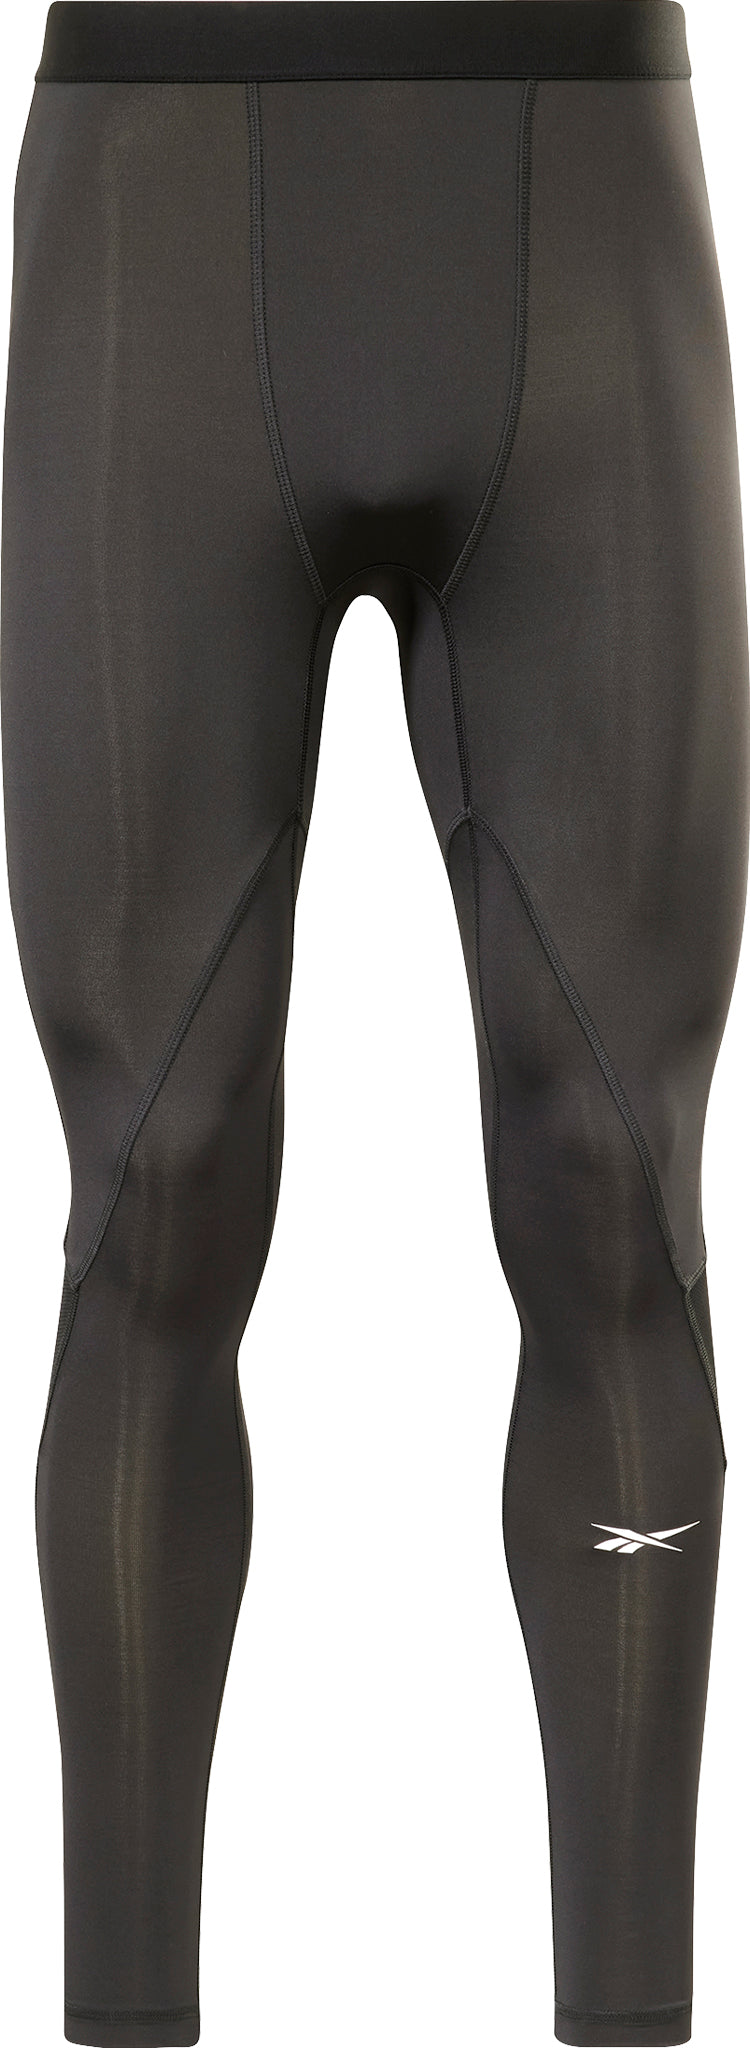 Reebok Workout Ready Compression Tights - Men's